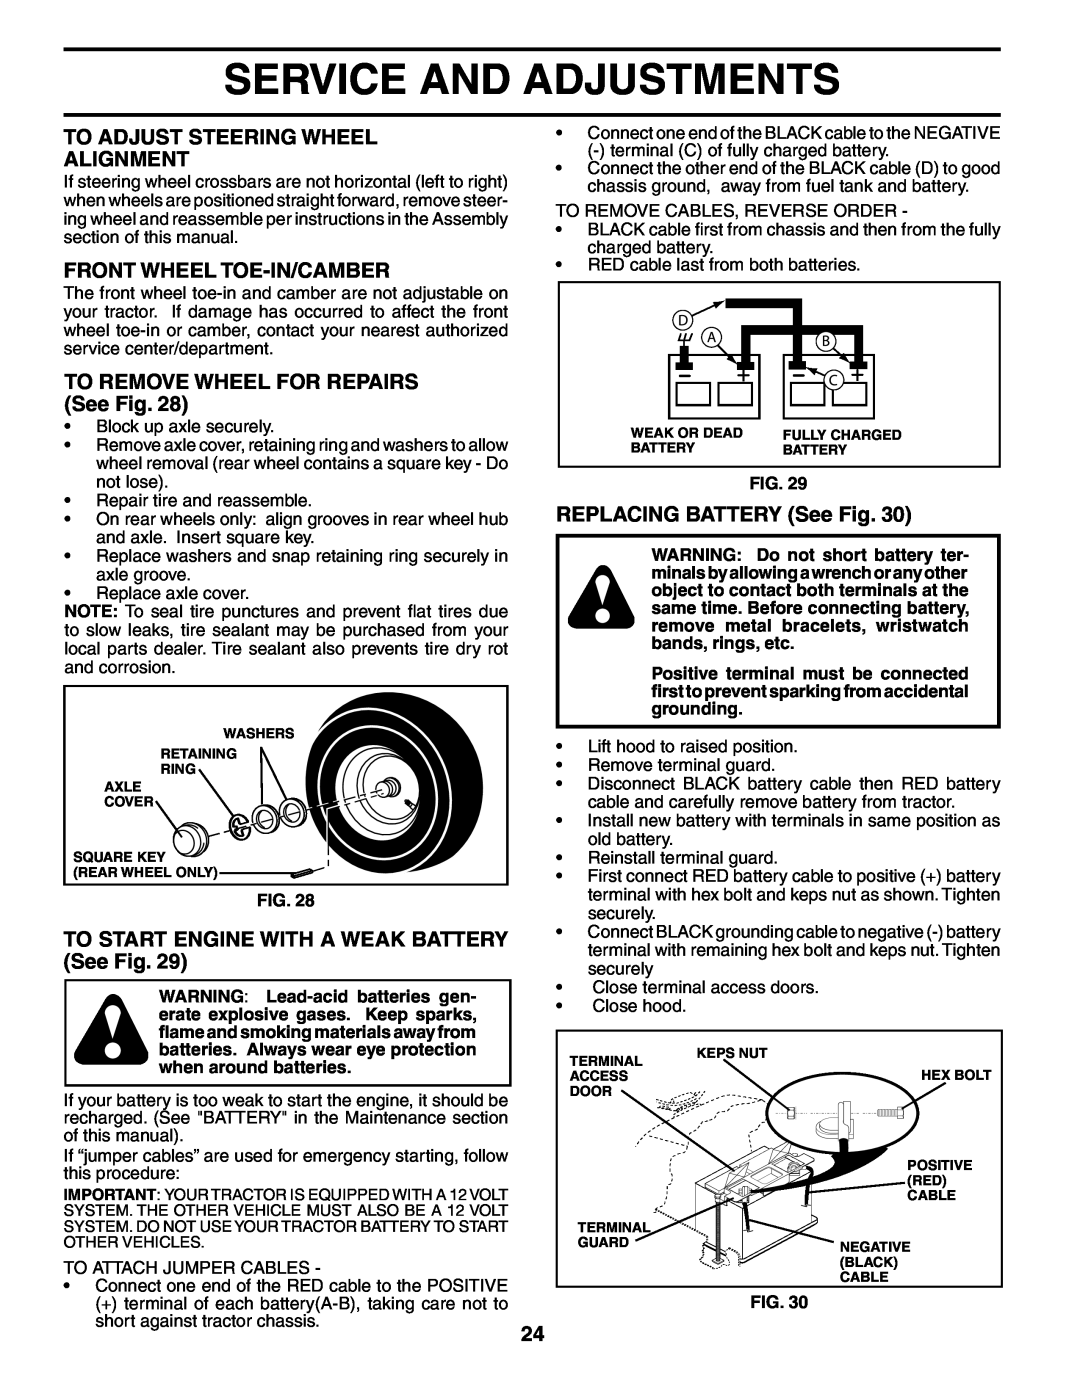 Poulan POGT20H48STA To Adjust Steering Wheel Alignment, Front Wheel Toe-In/Camber, TO REMOVE WHEEL FOR REPAIRS See Fig 